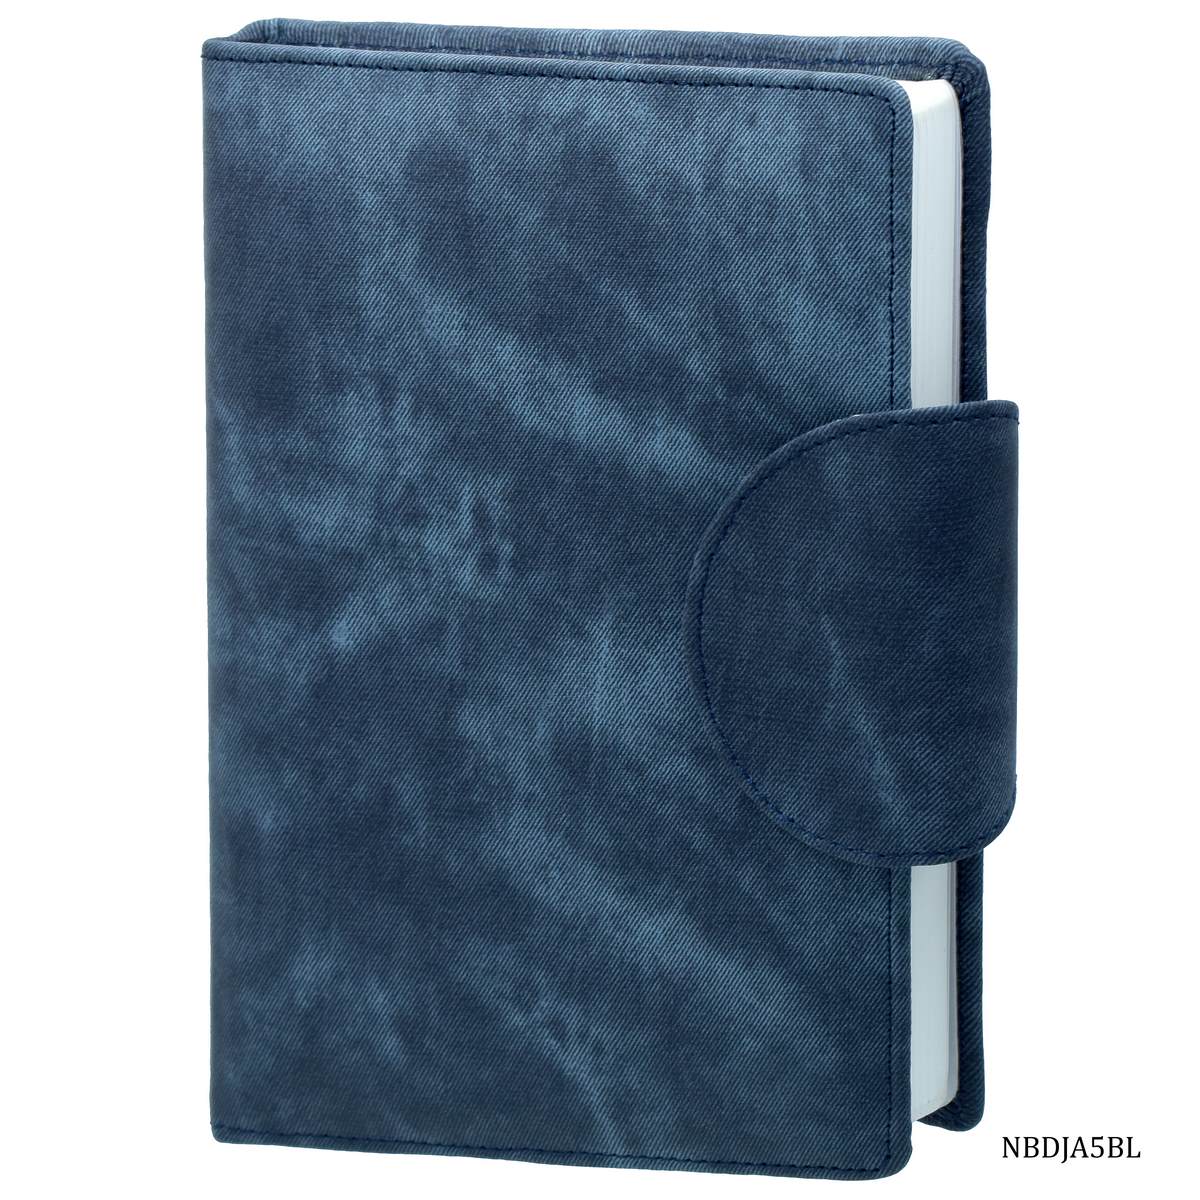 jags-mumbai Notebooks & Diaries Note book Diary A5 Jeans Cloth Blue